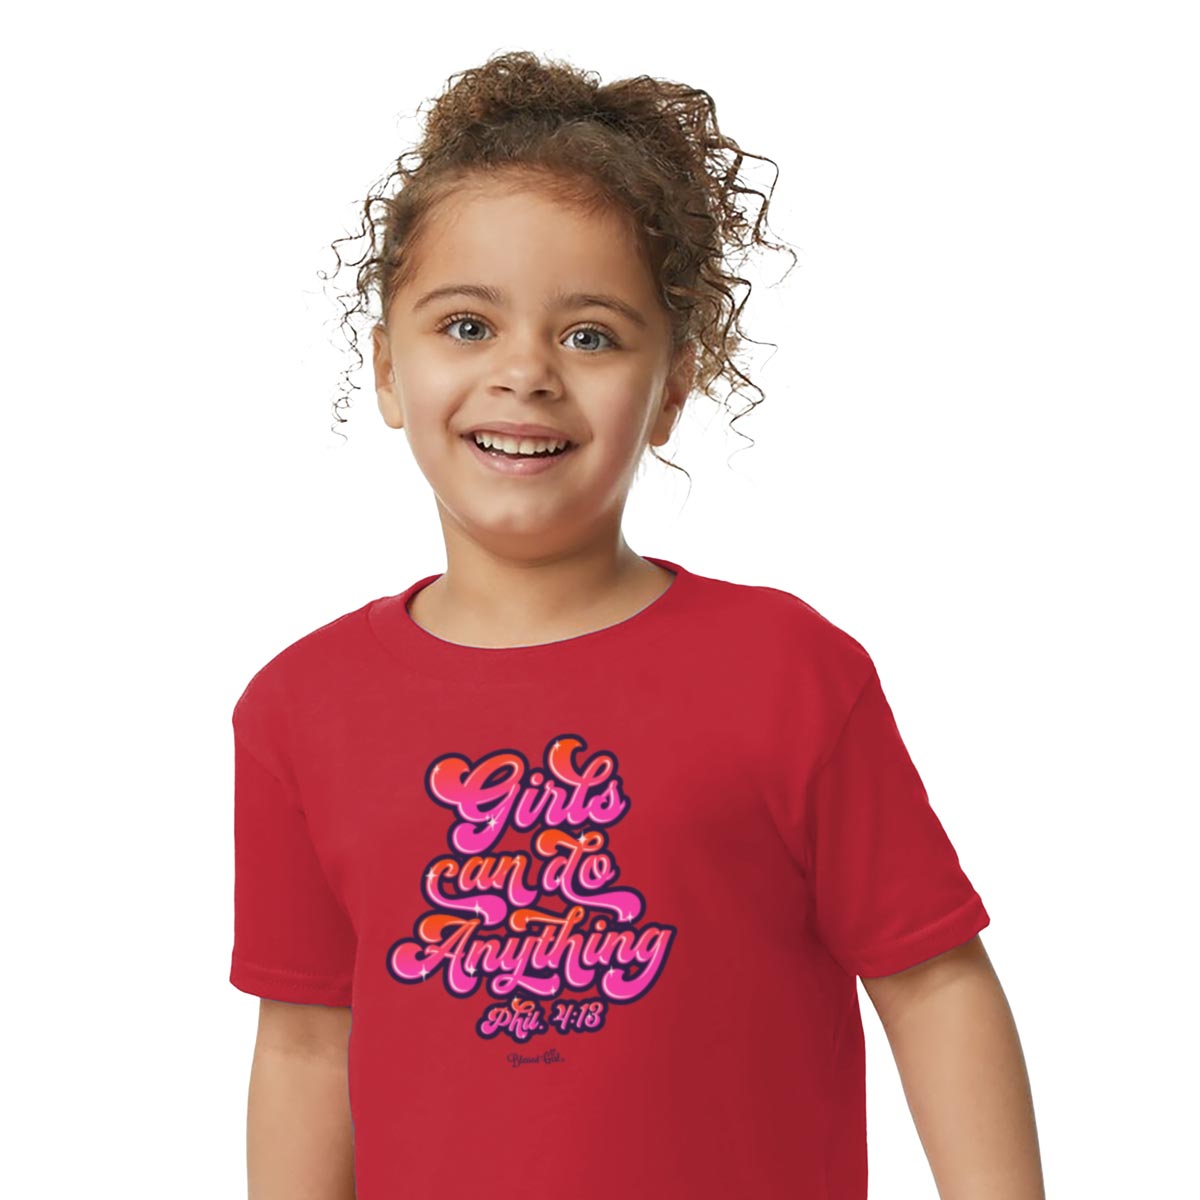 Blessed Girl Kids T-Shirt Girls Can Do Anything